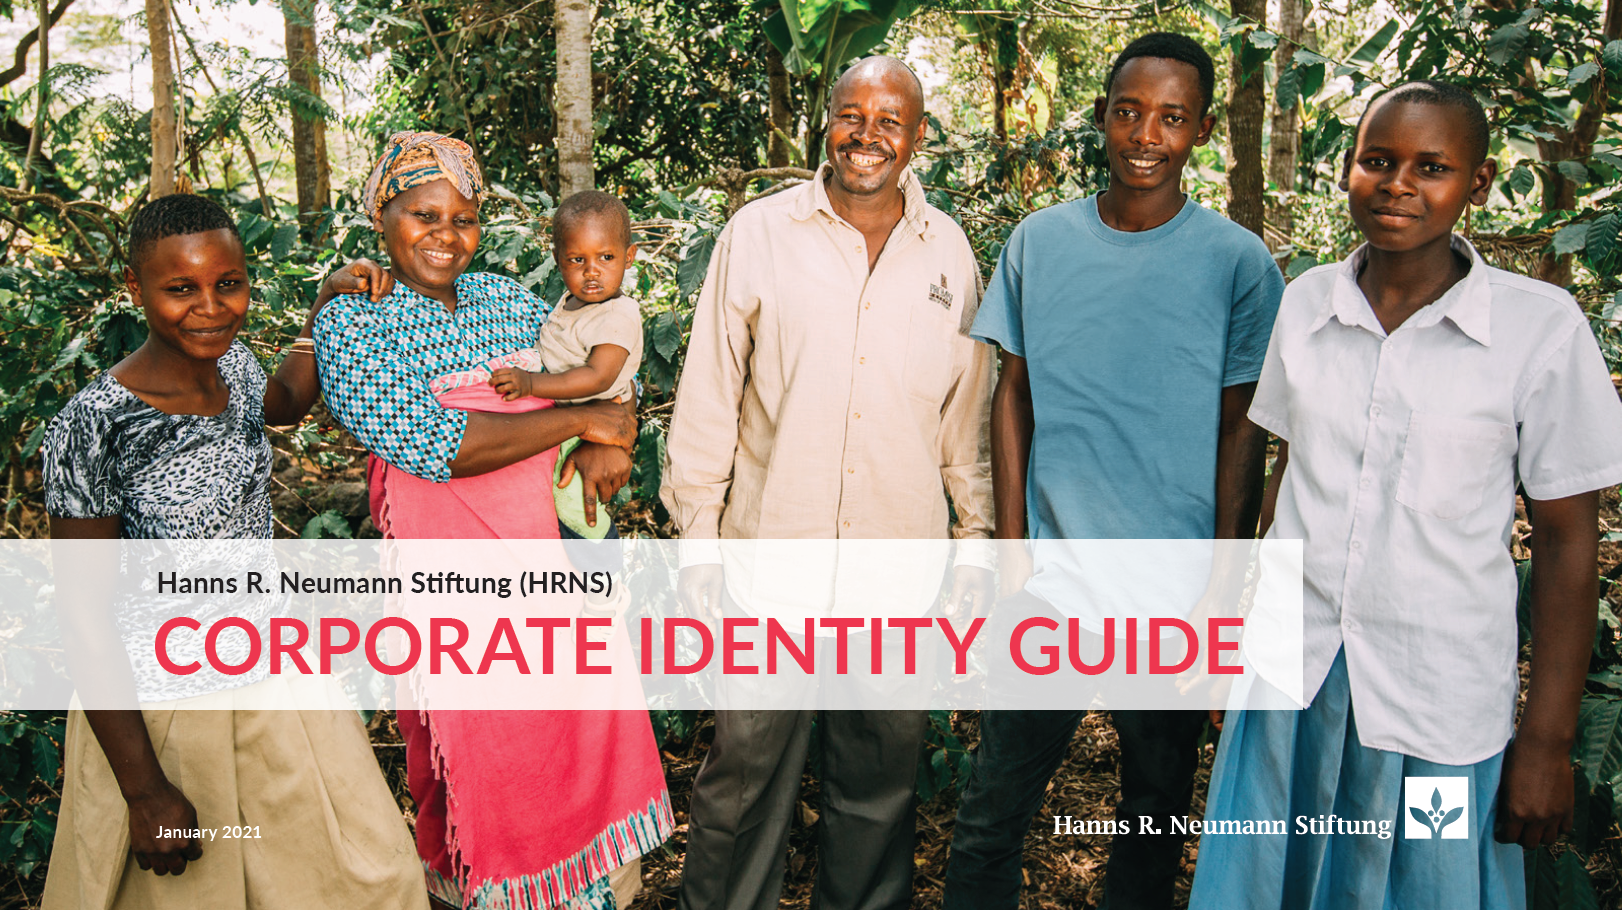 HRNS' Corporate Identity Guide